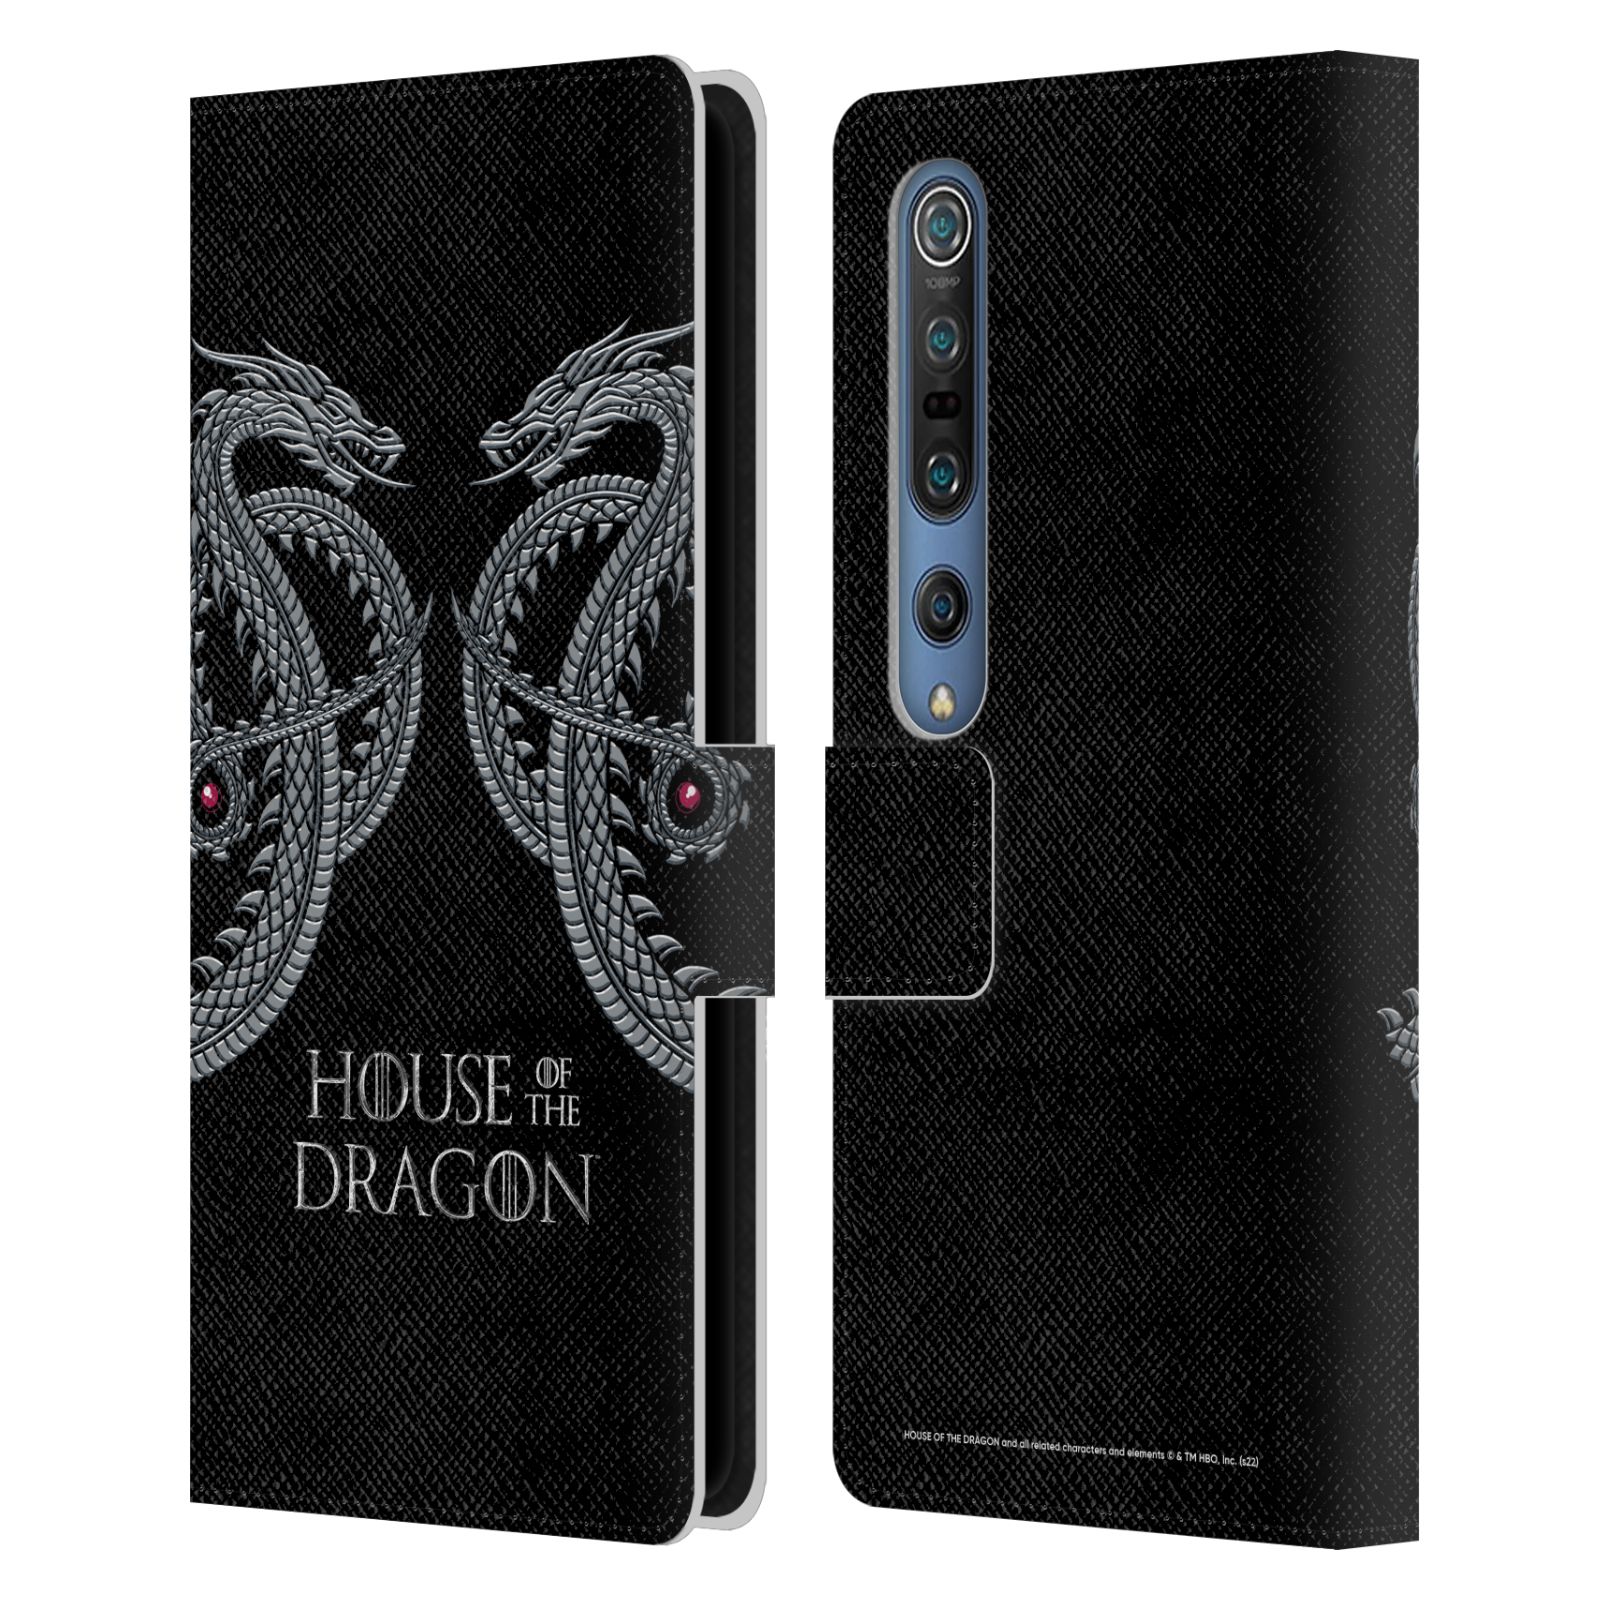 HOUSE OF THE DRAGON: TELEVISION SERIES GRAPHICS LEATHER BOOK CASE XIAOMI PHONES